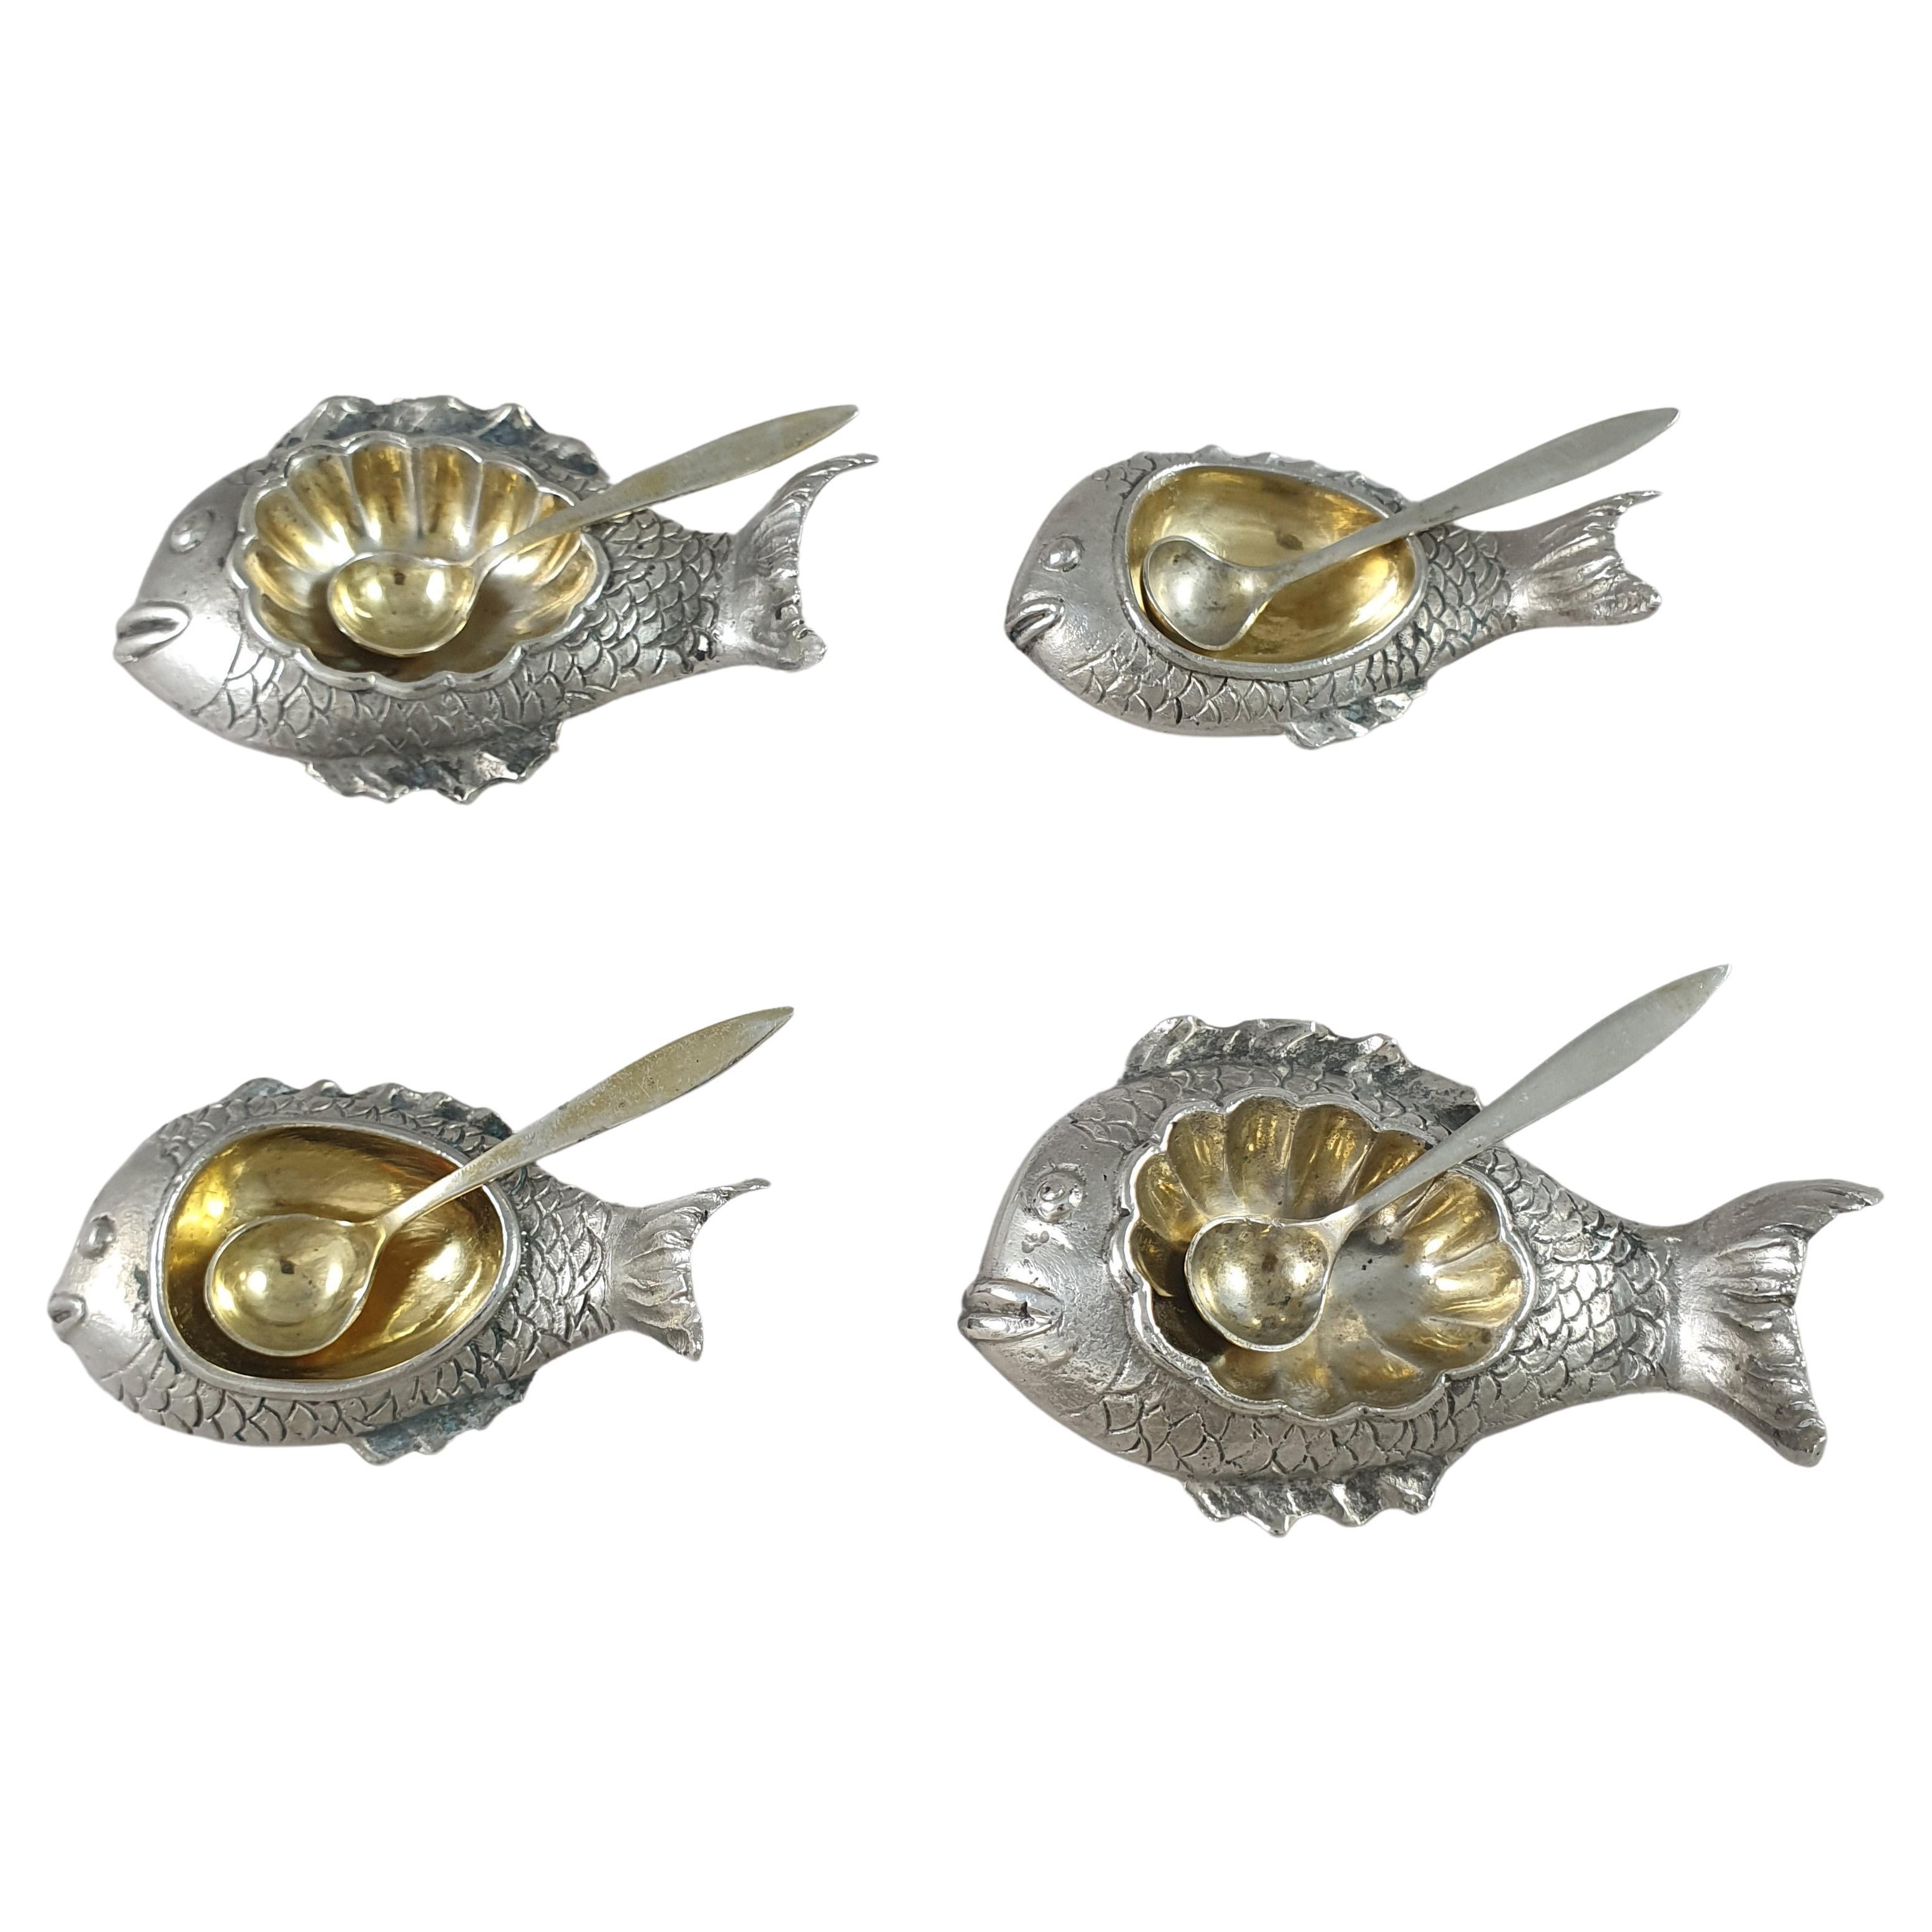 4 Solid Silver Salt and Pepper Cellars Fish